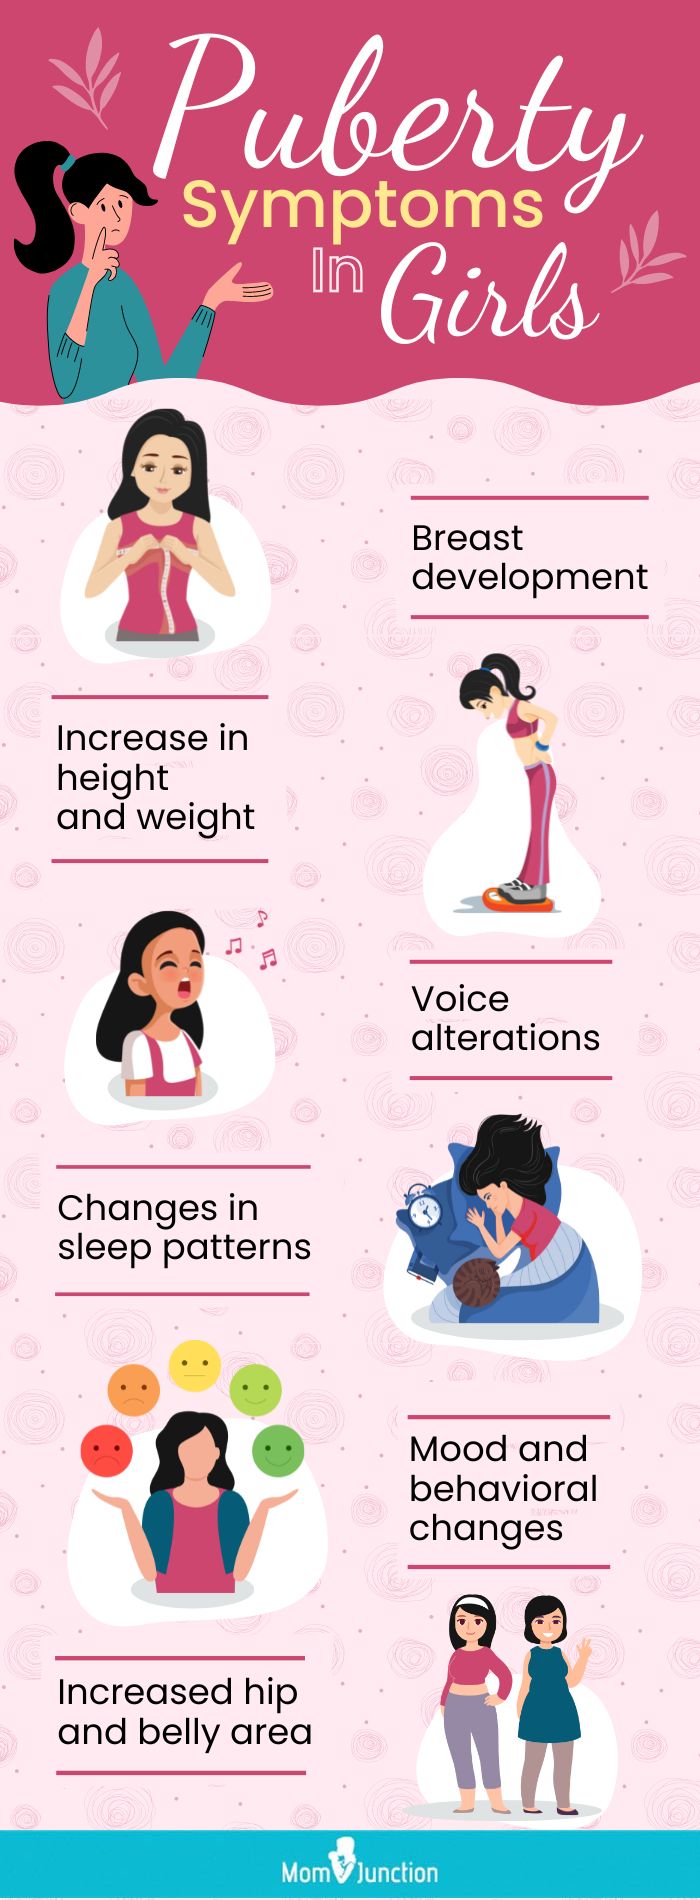 puberty symptoms in girls (infographic)